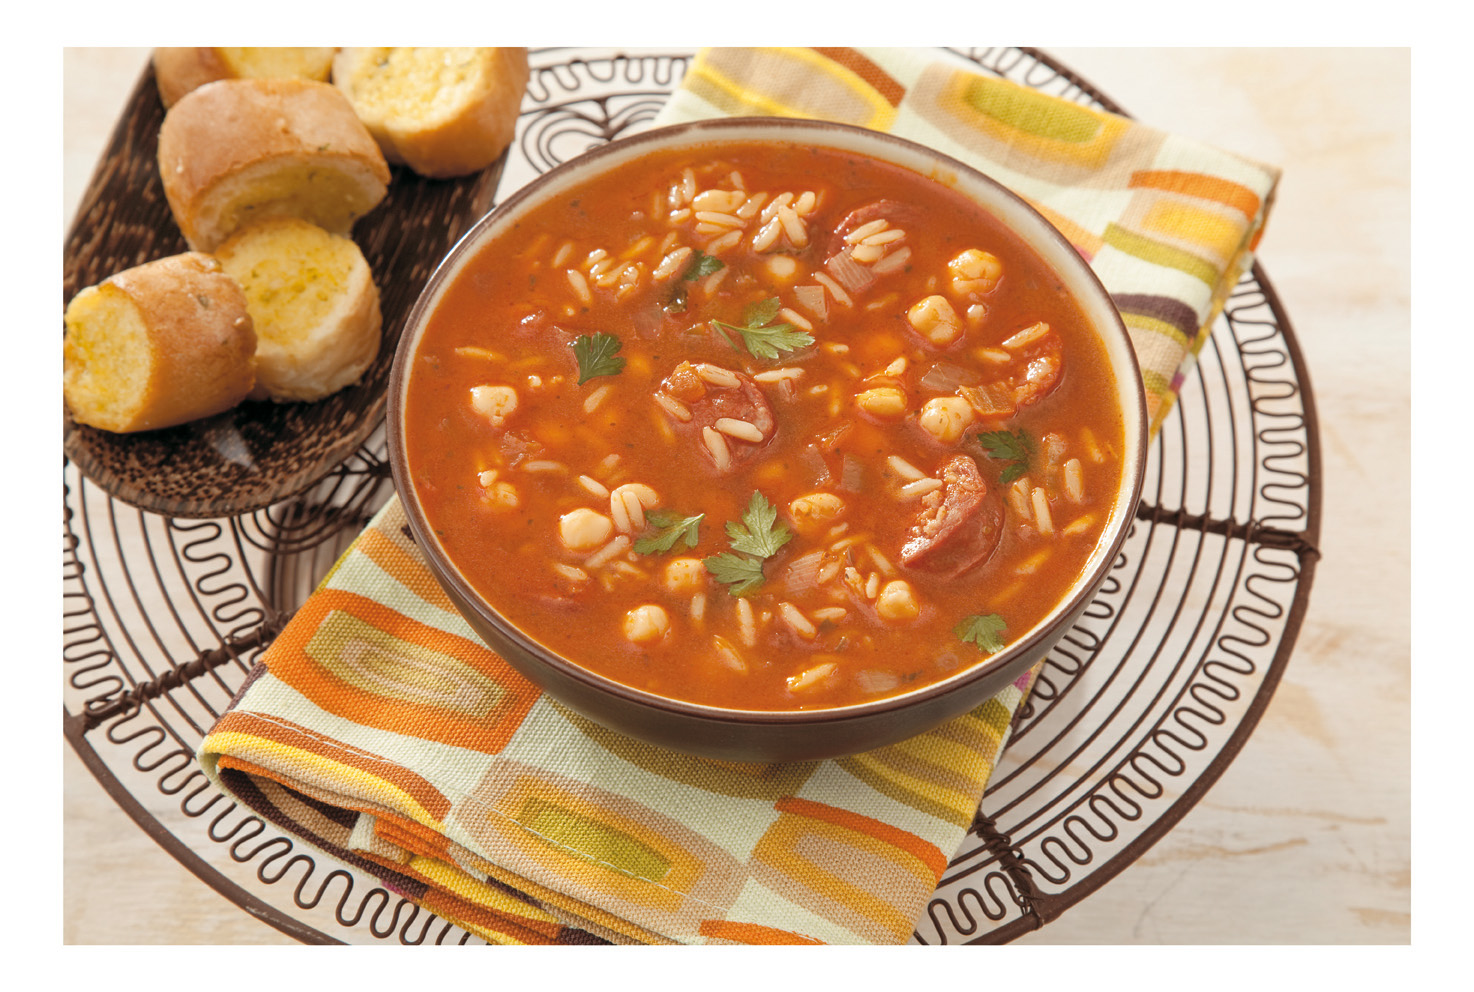 Spanish style rice soup with chickpeas and chorizo